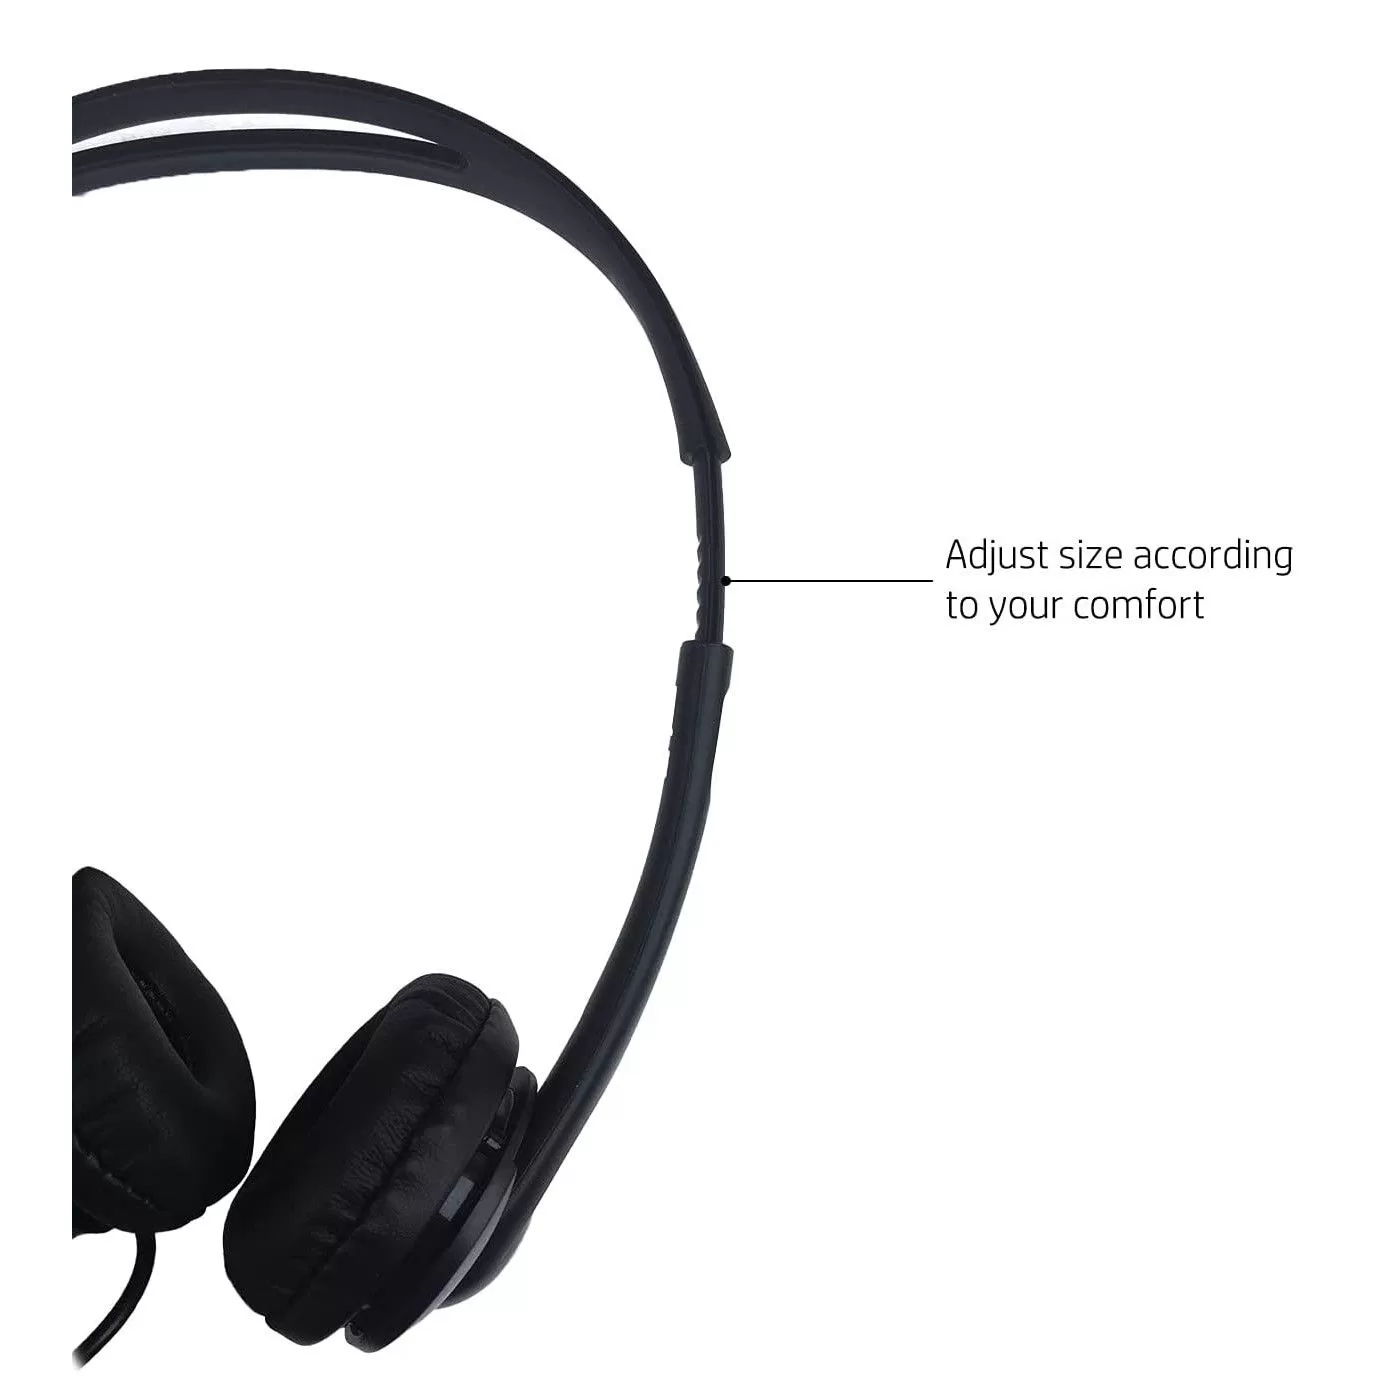 HP Wired Mic Headset T1A66AA, with Microphone for PC (3.5mm Stereo Connector) Accessories 8